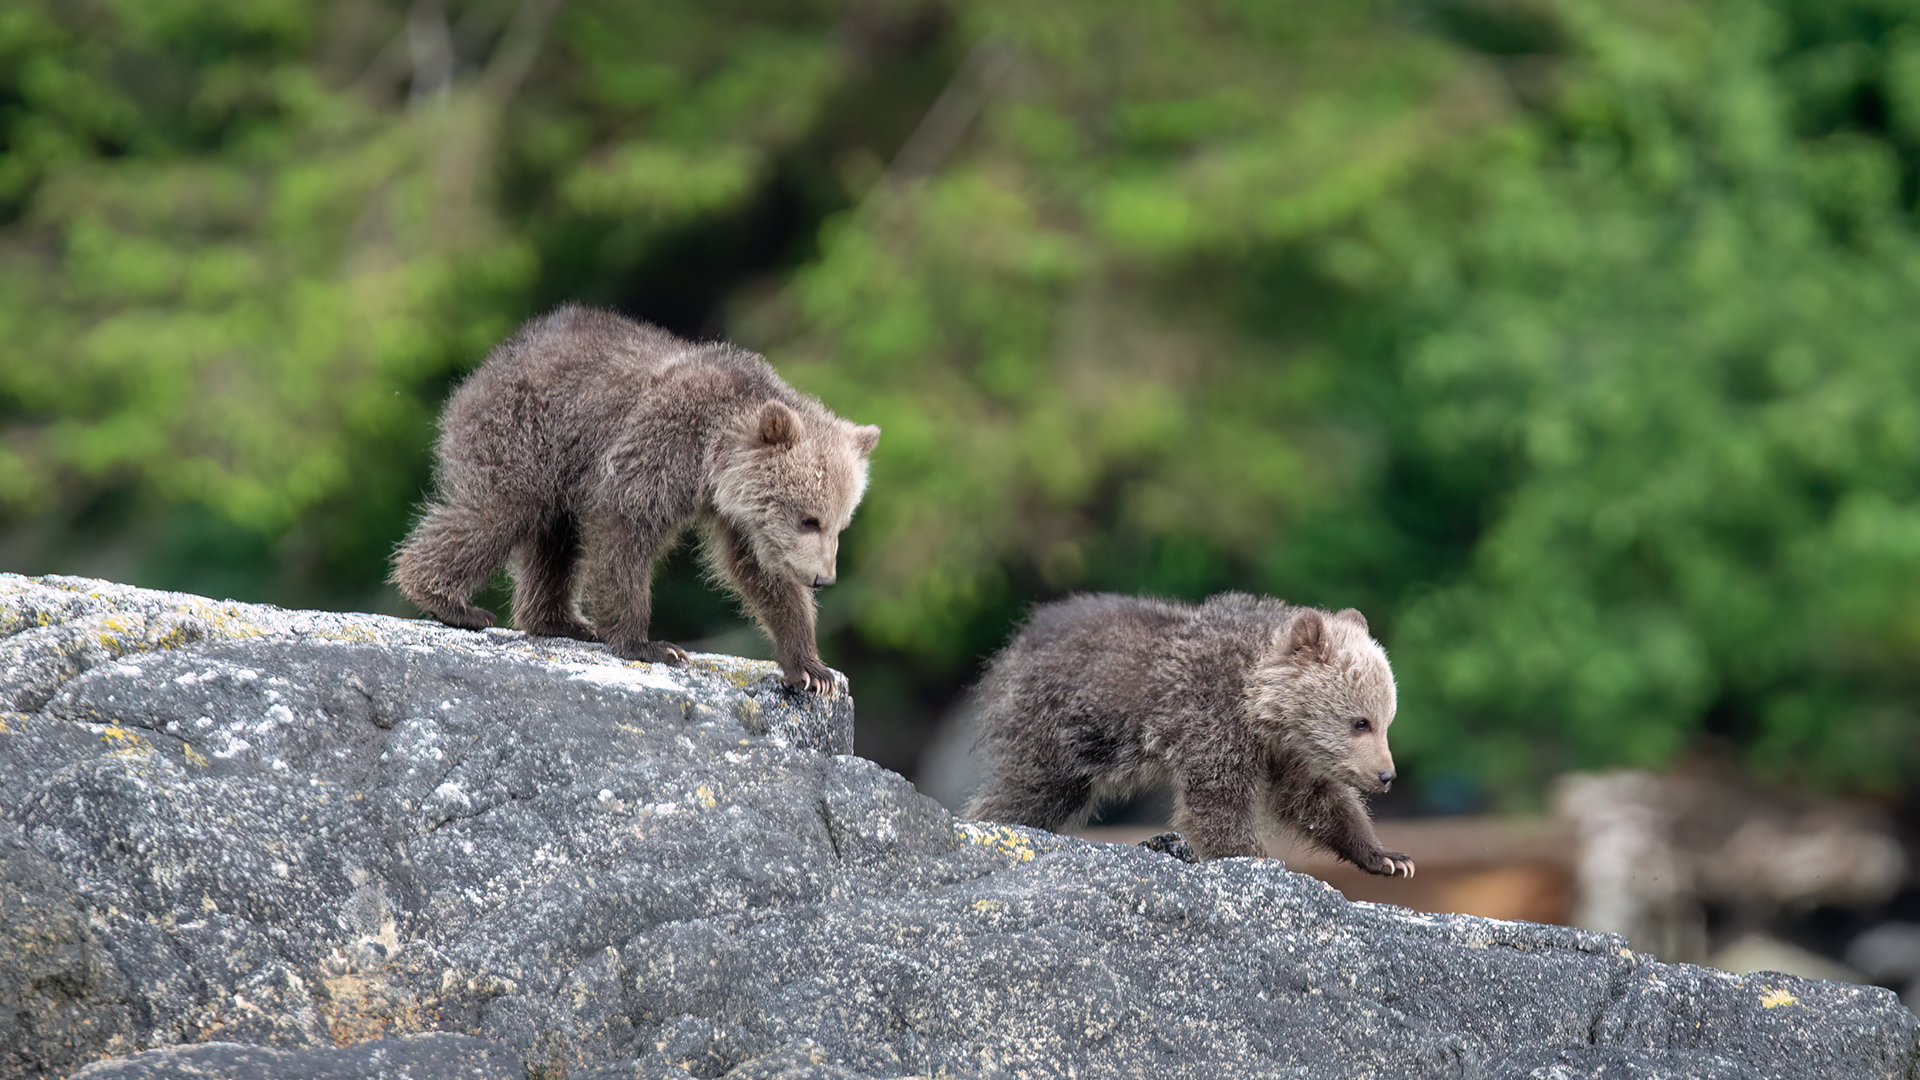 Lastly, we have some very young cubs of the year. These two were likely 3-4 months old and weighed around 20 lbs. Their mother is the bear in image #1, and it’s already evident that she’s passed on her blonde facial fur to her cubs. Adorable!